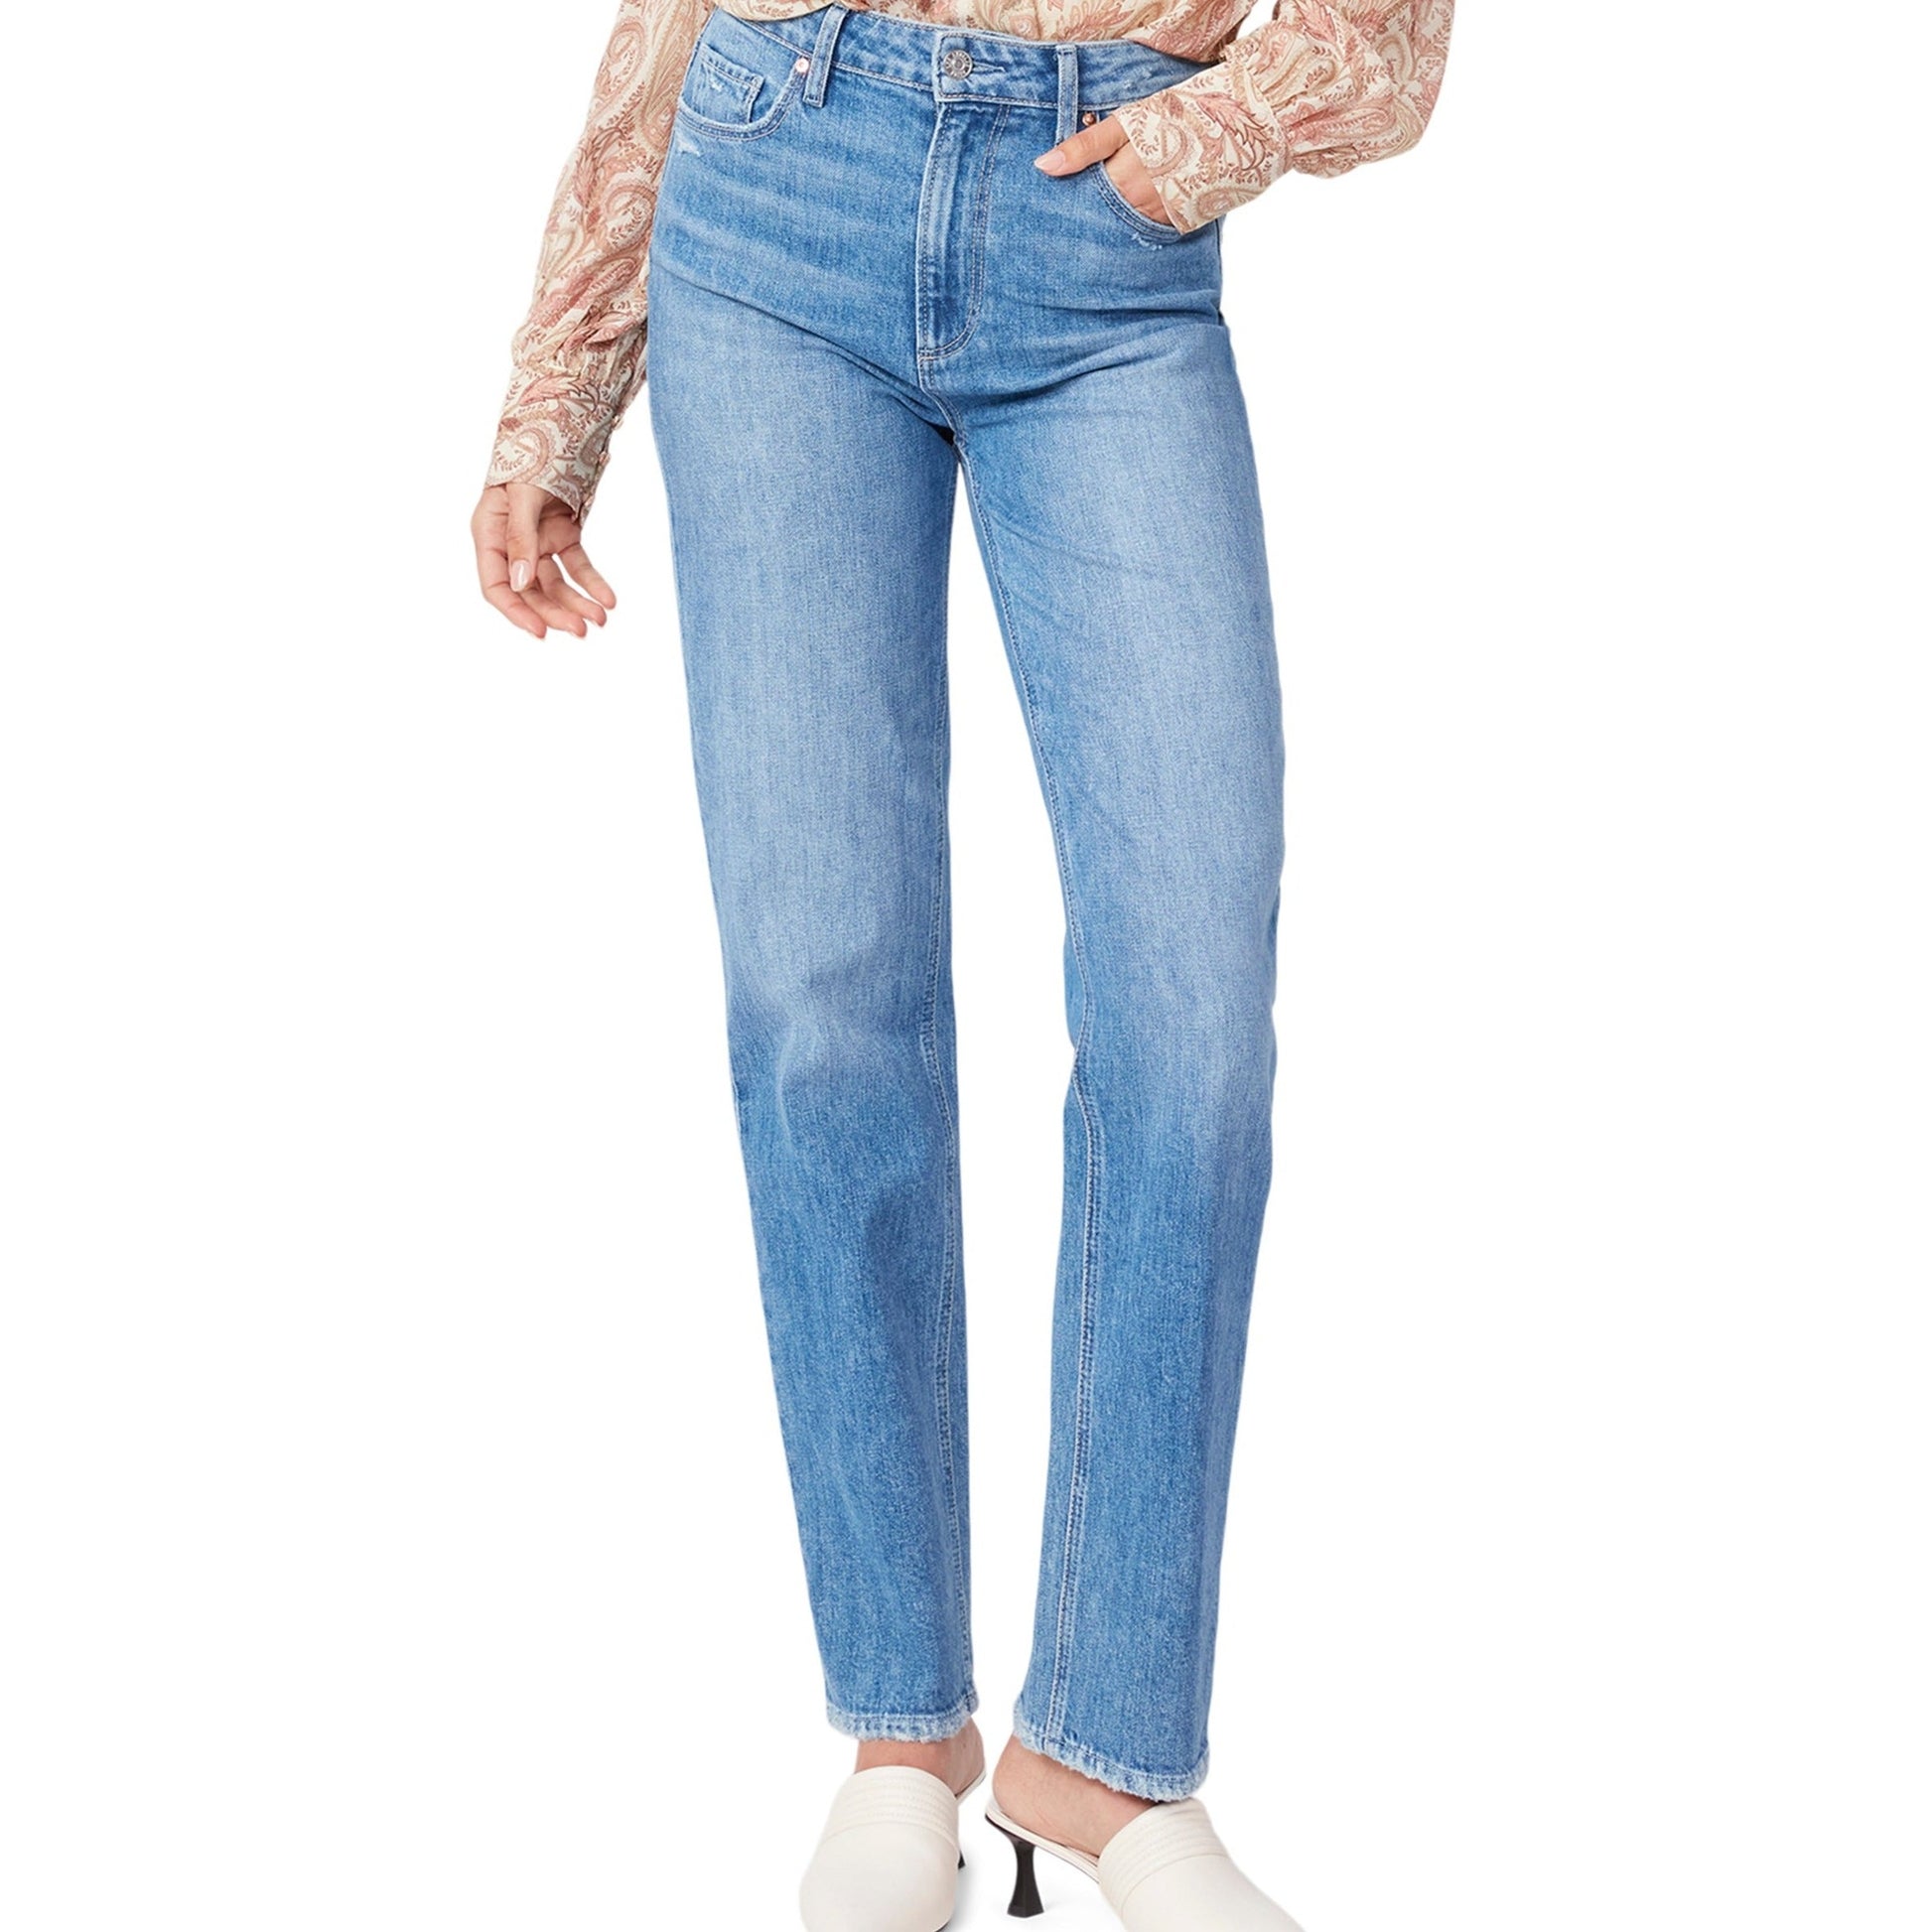 A woman wearing Paige Sarah Straight 30" - Wannabe Distressed jeans and a blouse.